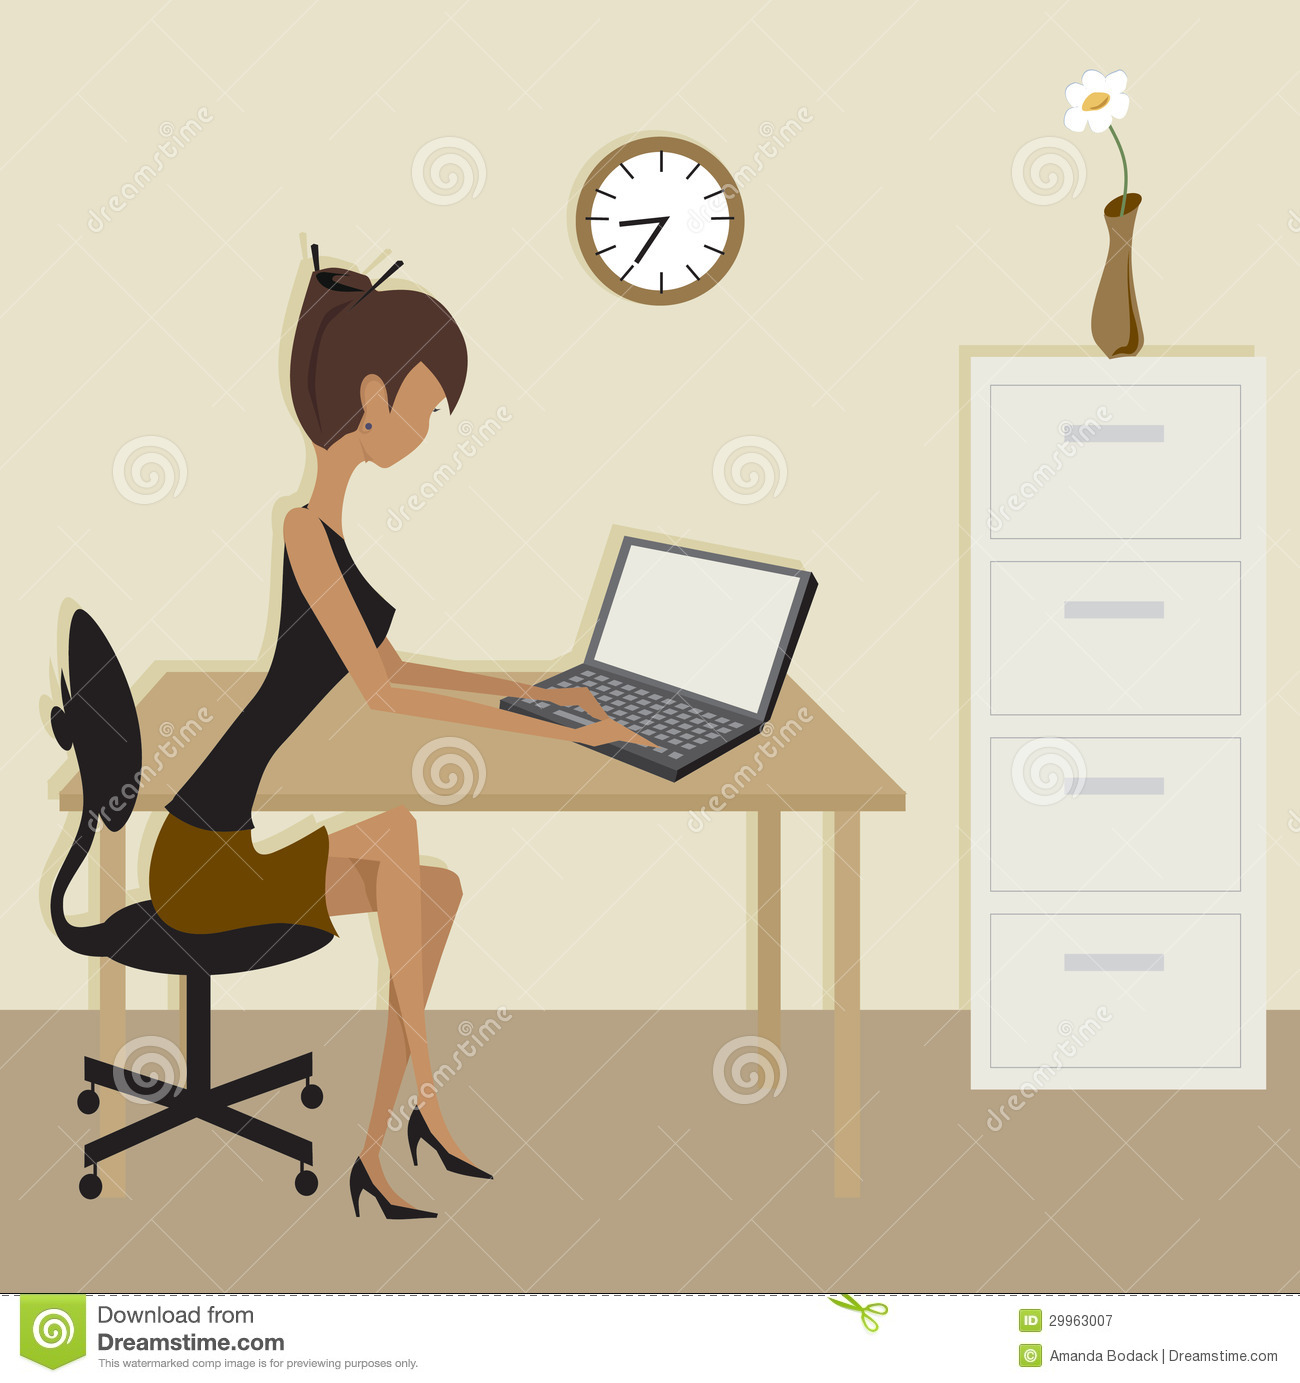 Simple Clip Art Office Scene Royalty Free Stock Photography   Image